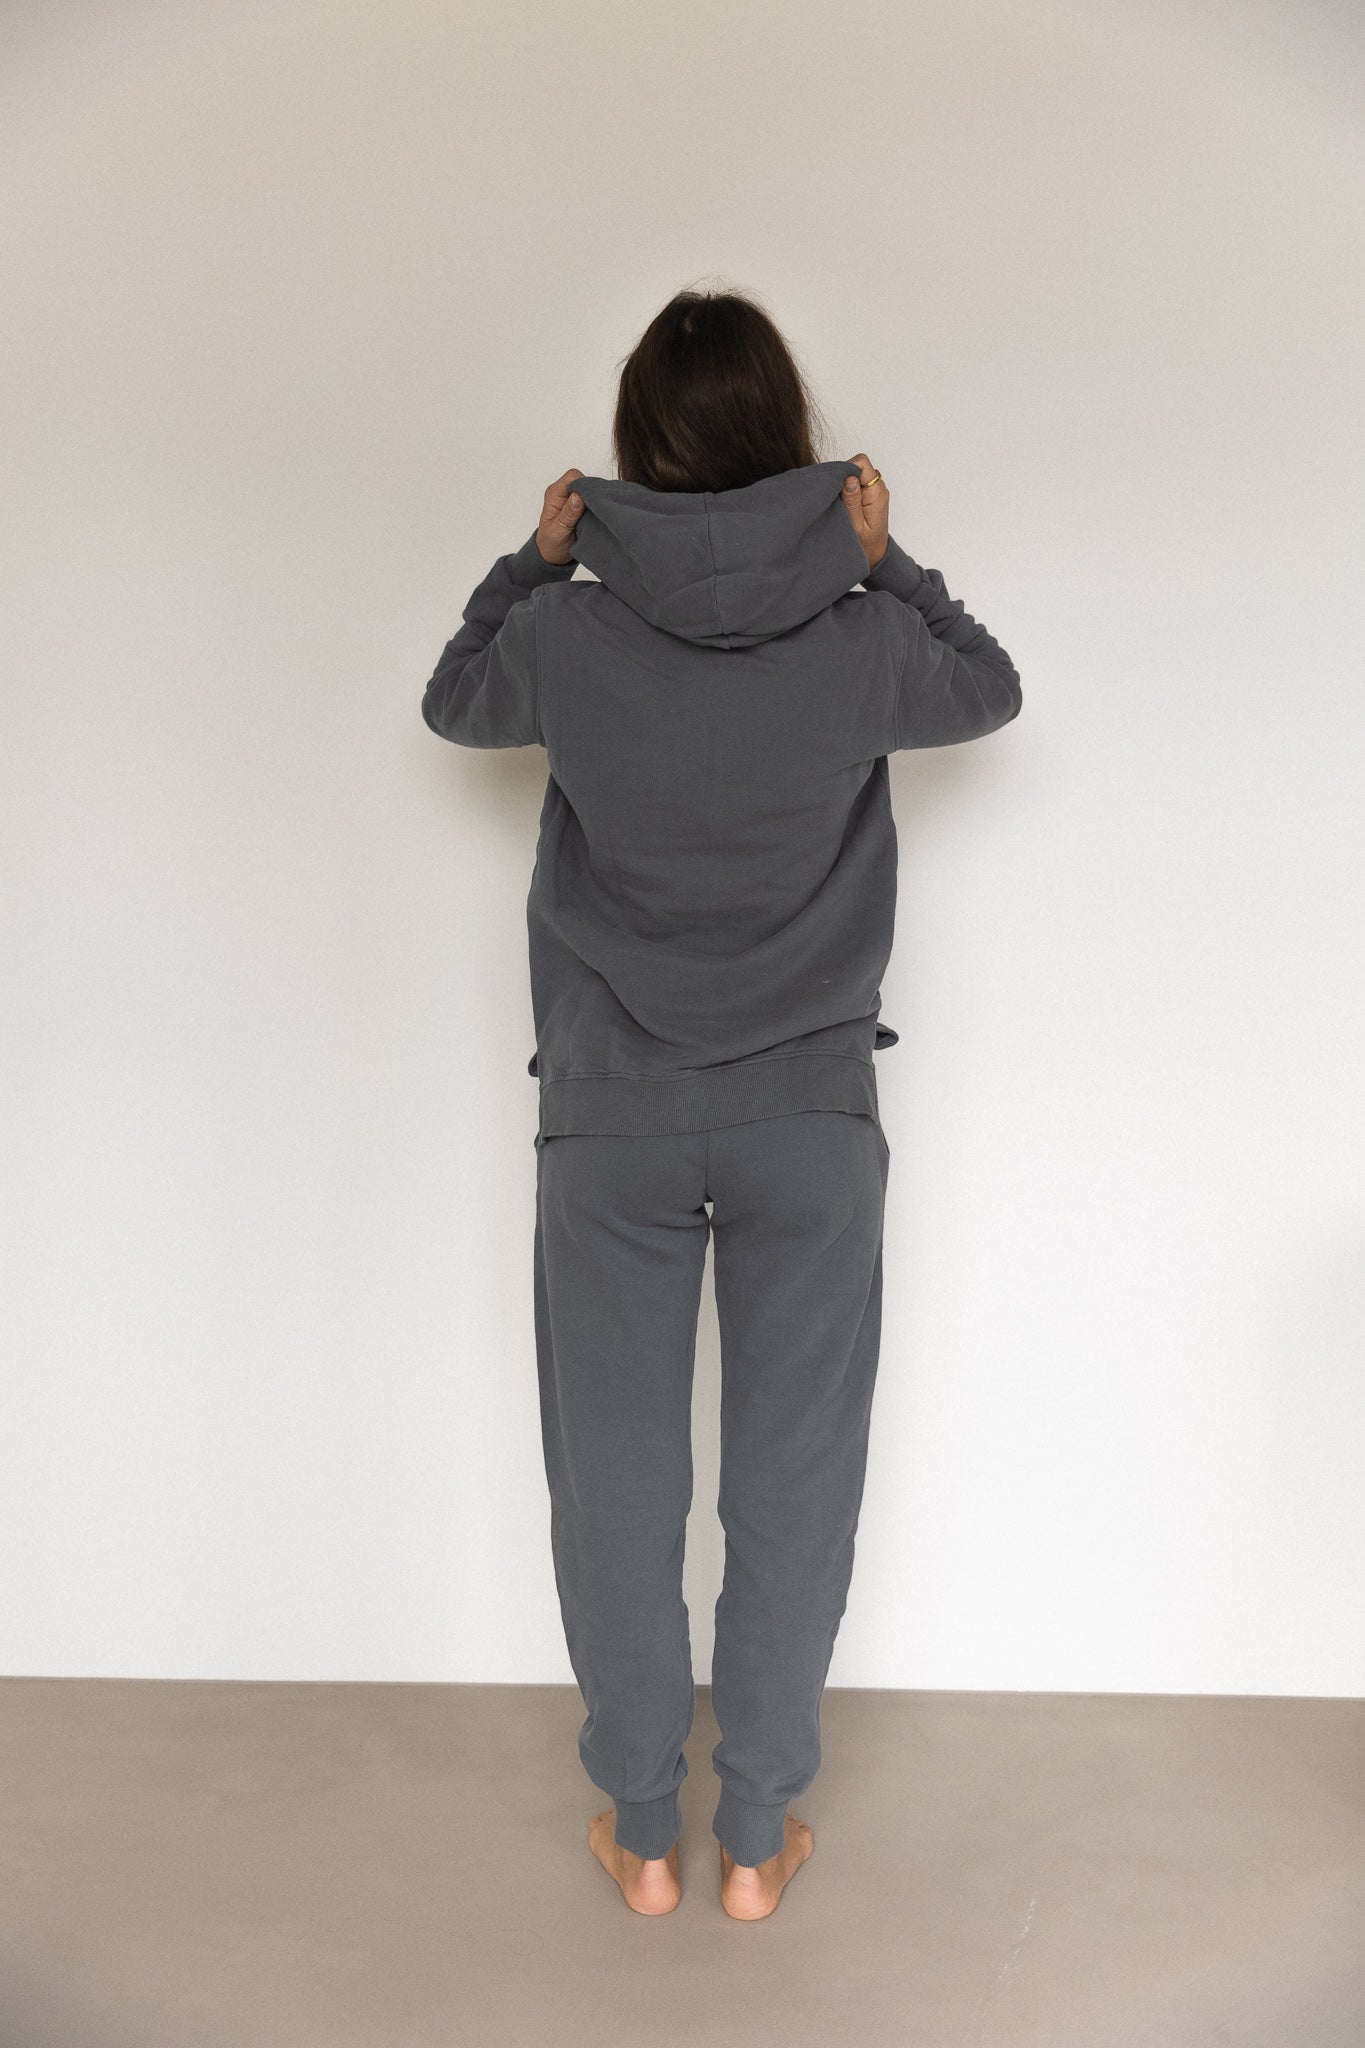 Anthracite-colored PINA hoodie made of 100% organic cotton from PURA Clothing